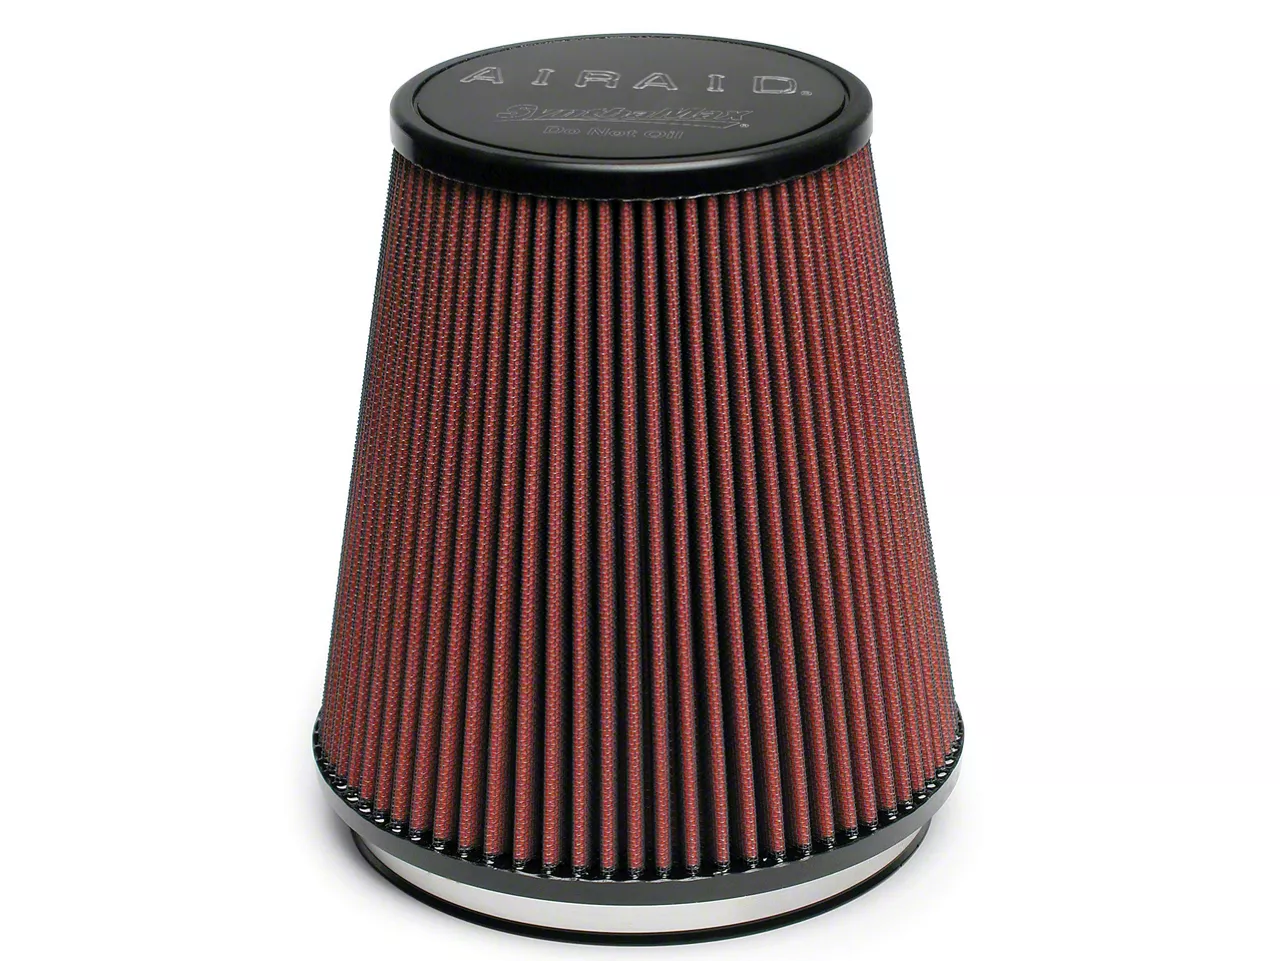 Airaid Mustang Cold Air Intake Replacement Filter Synthaflow Oiled